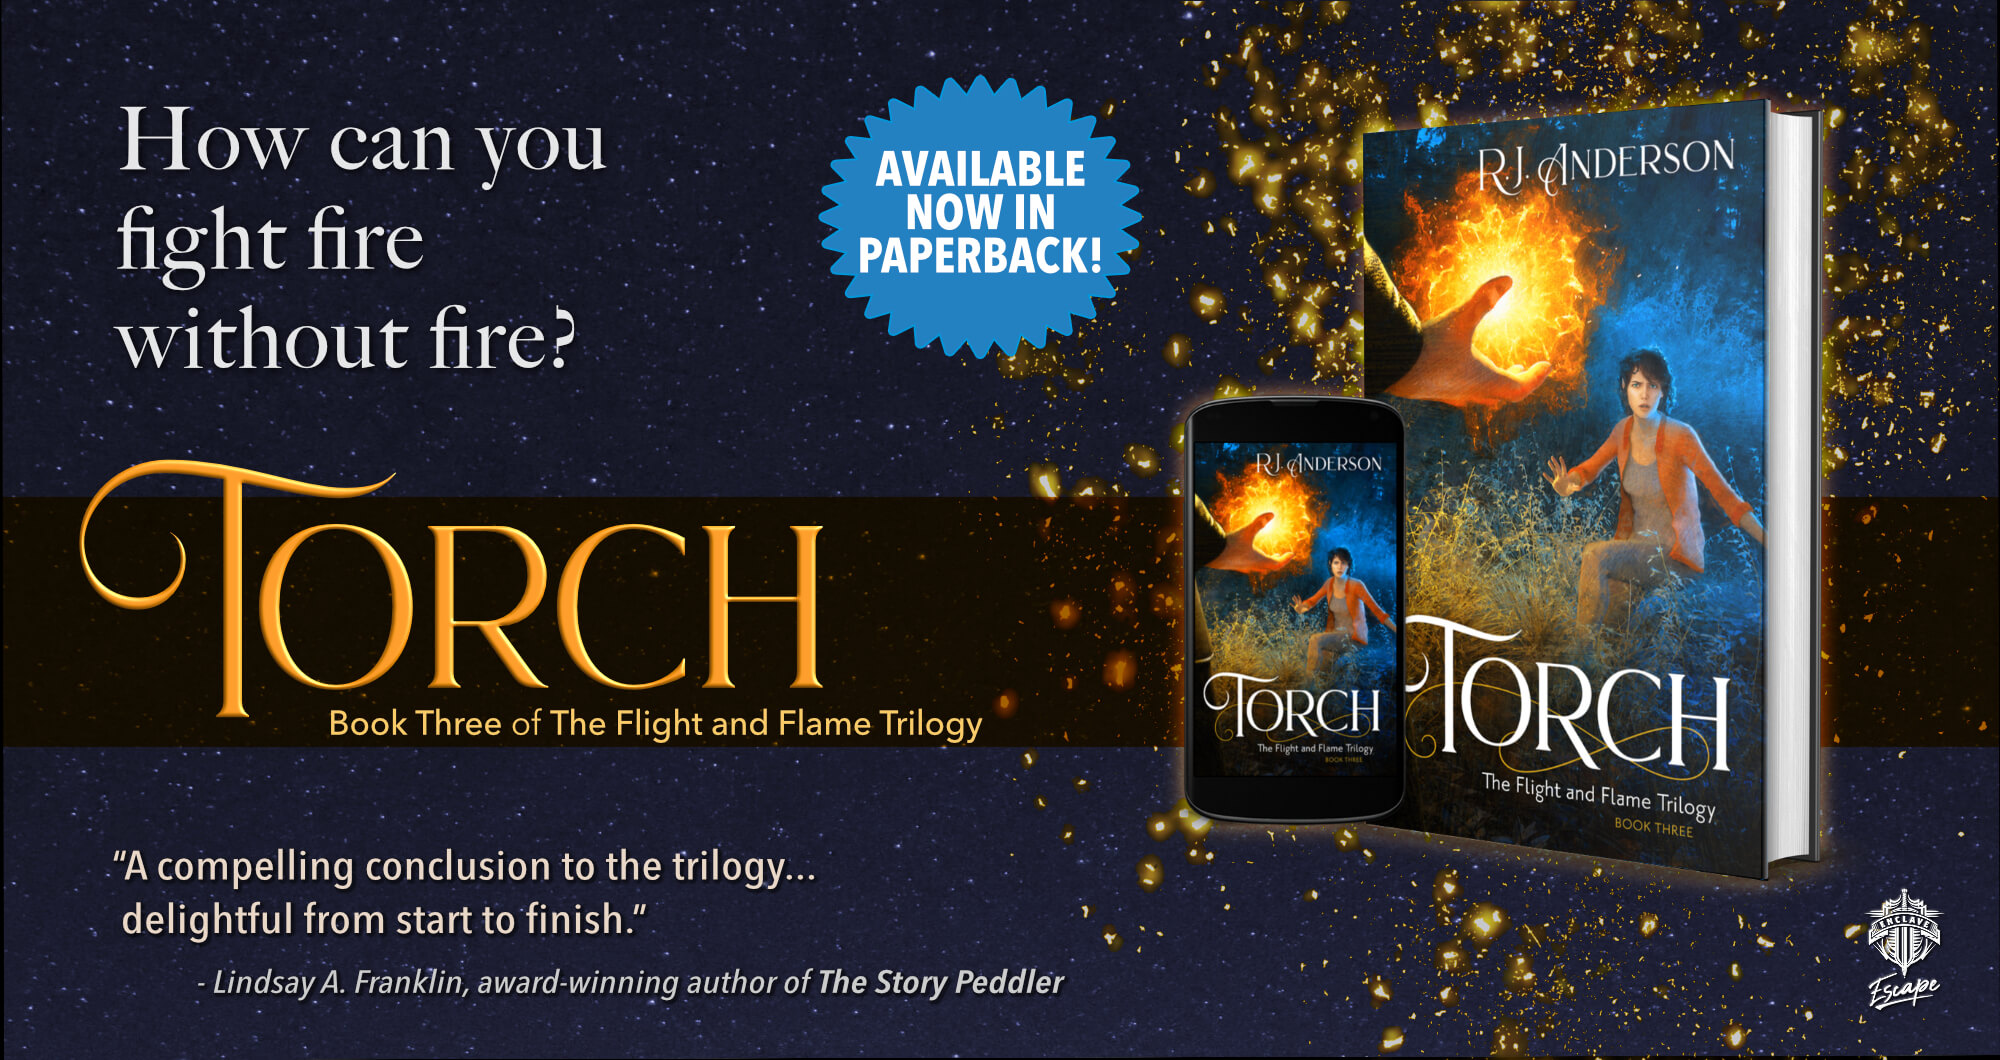 Torch by R.J. Anderson - in Paperback Now